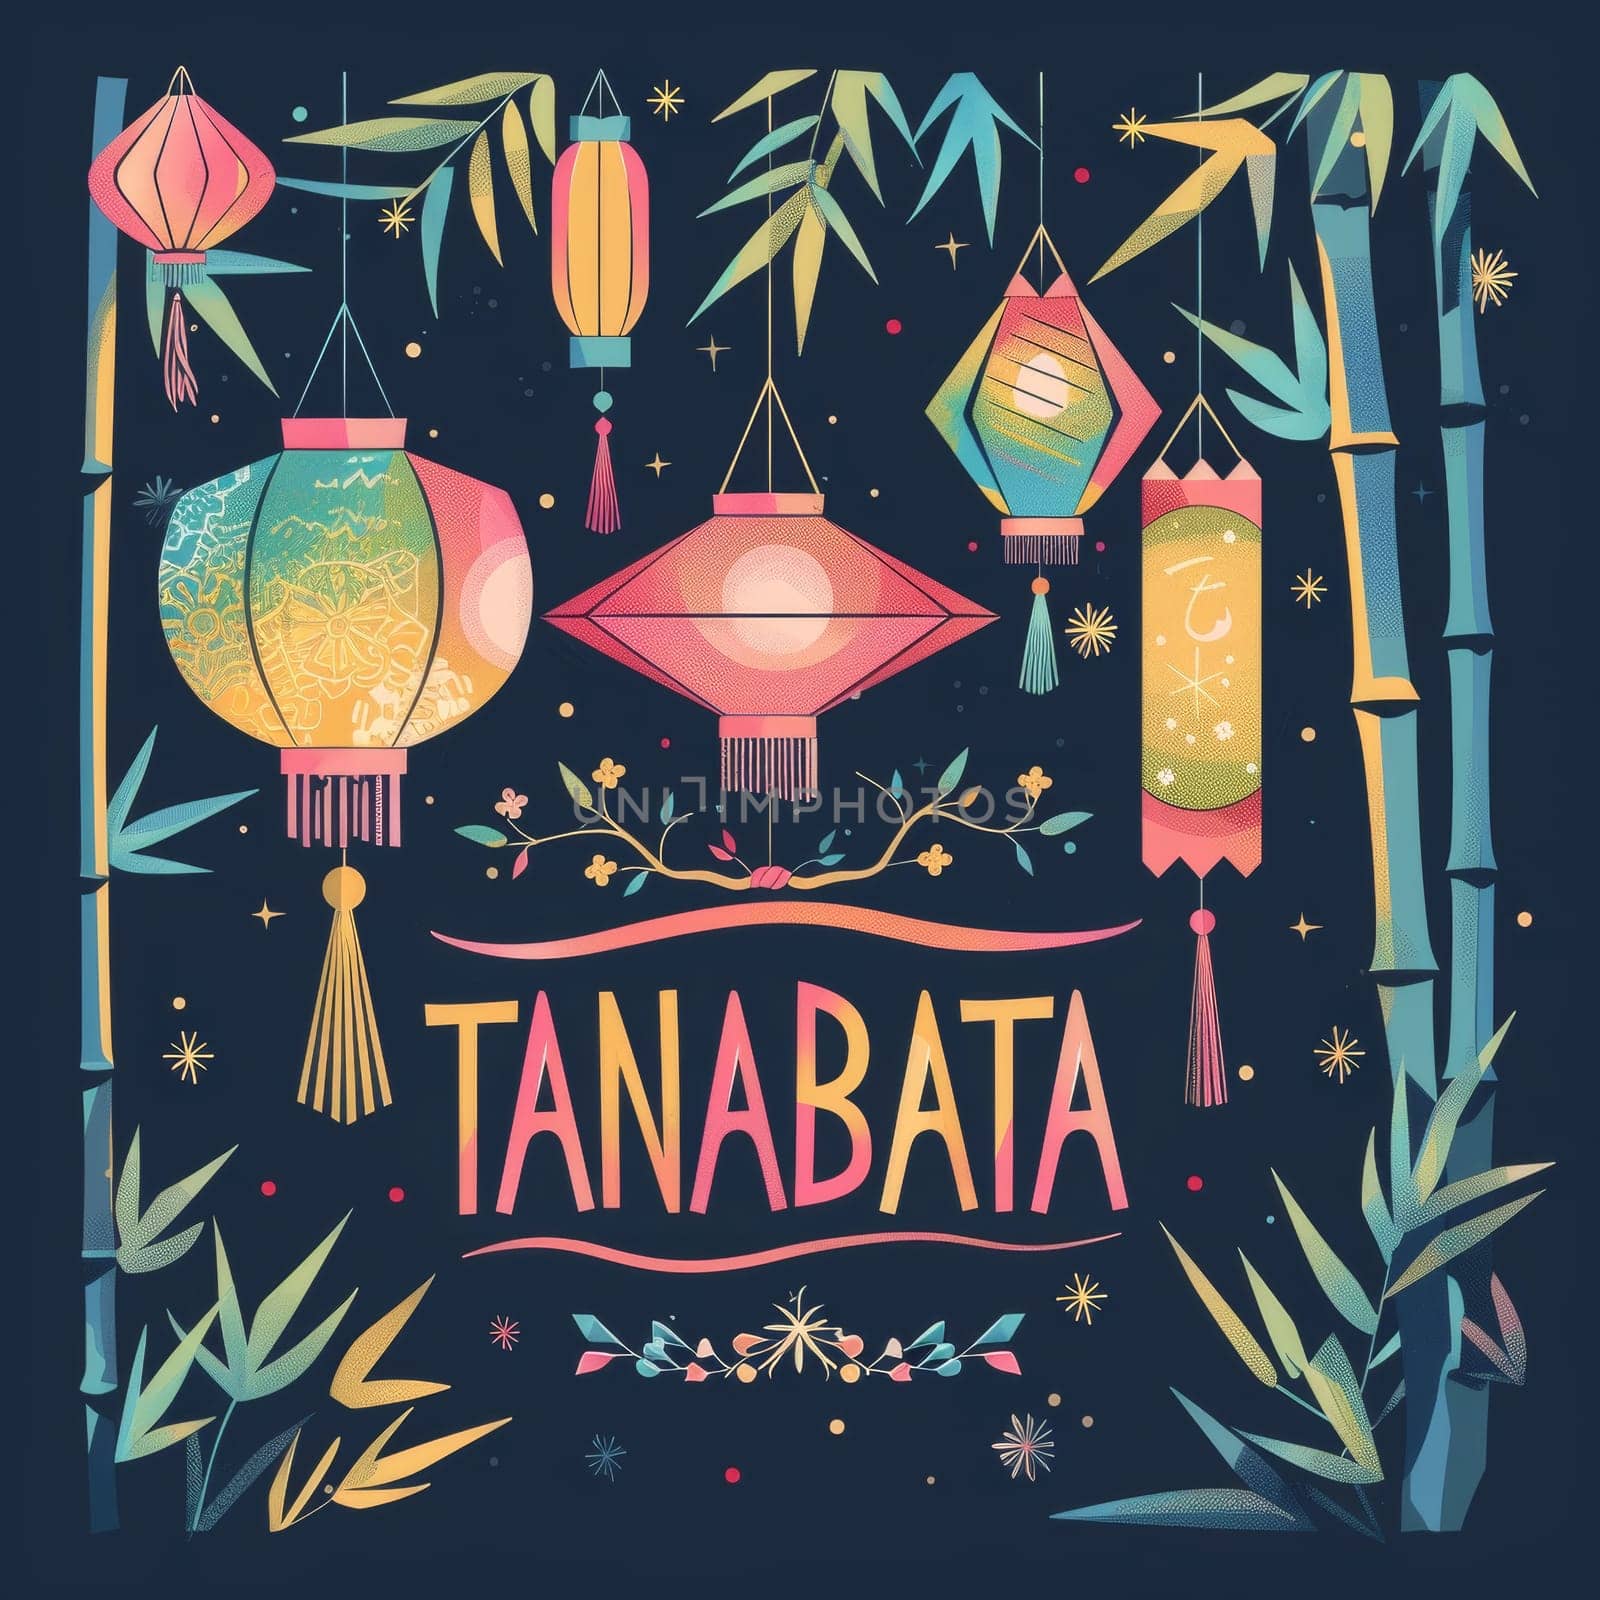 A vivid illustration depicting the Tanabata festival with ornate paper lanterns and bamboo on a starry background. by sfinks